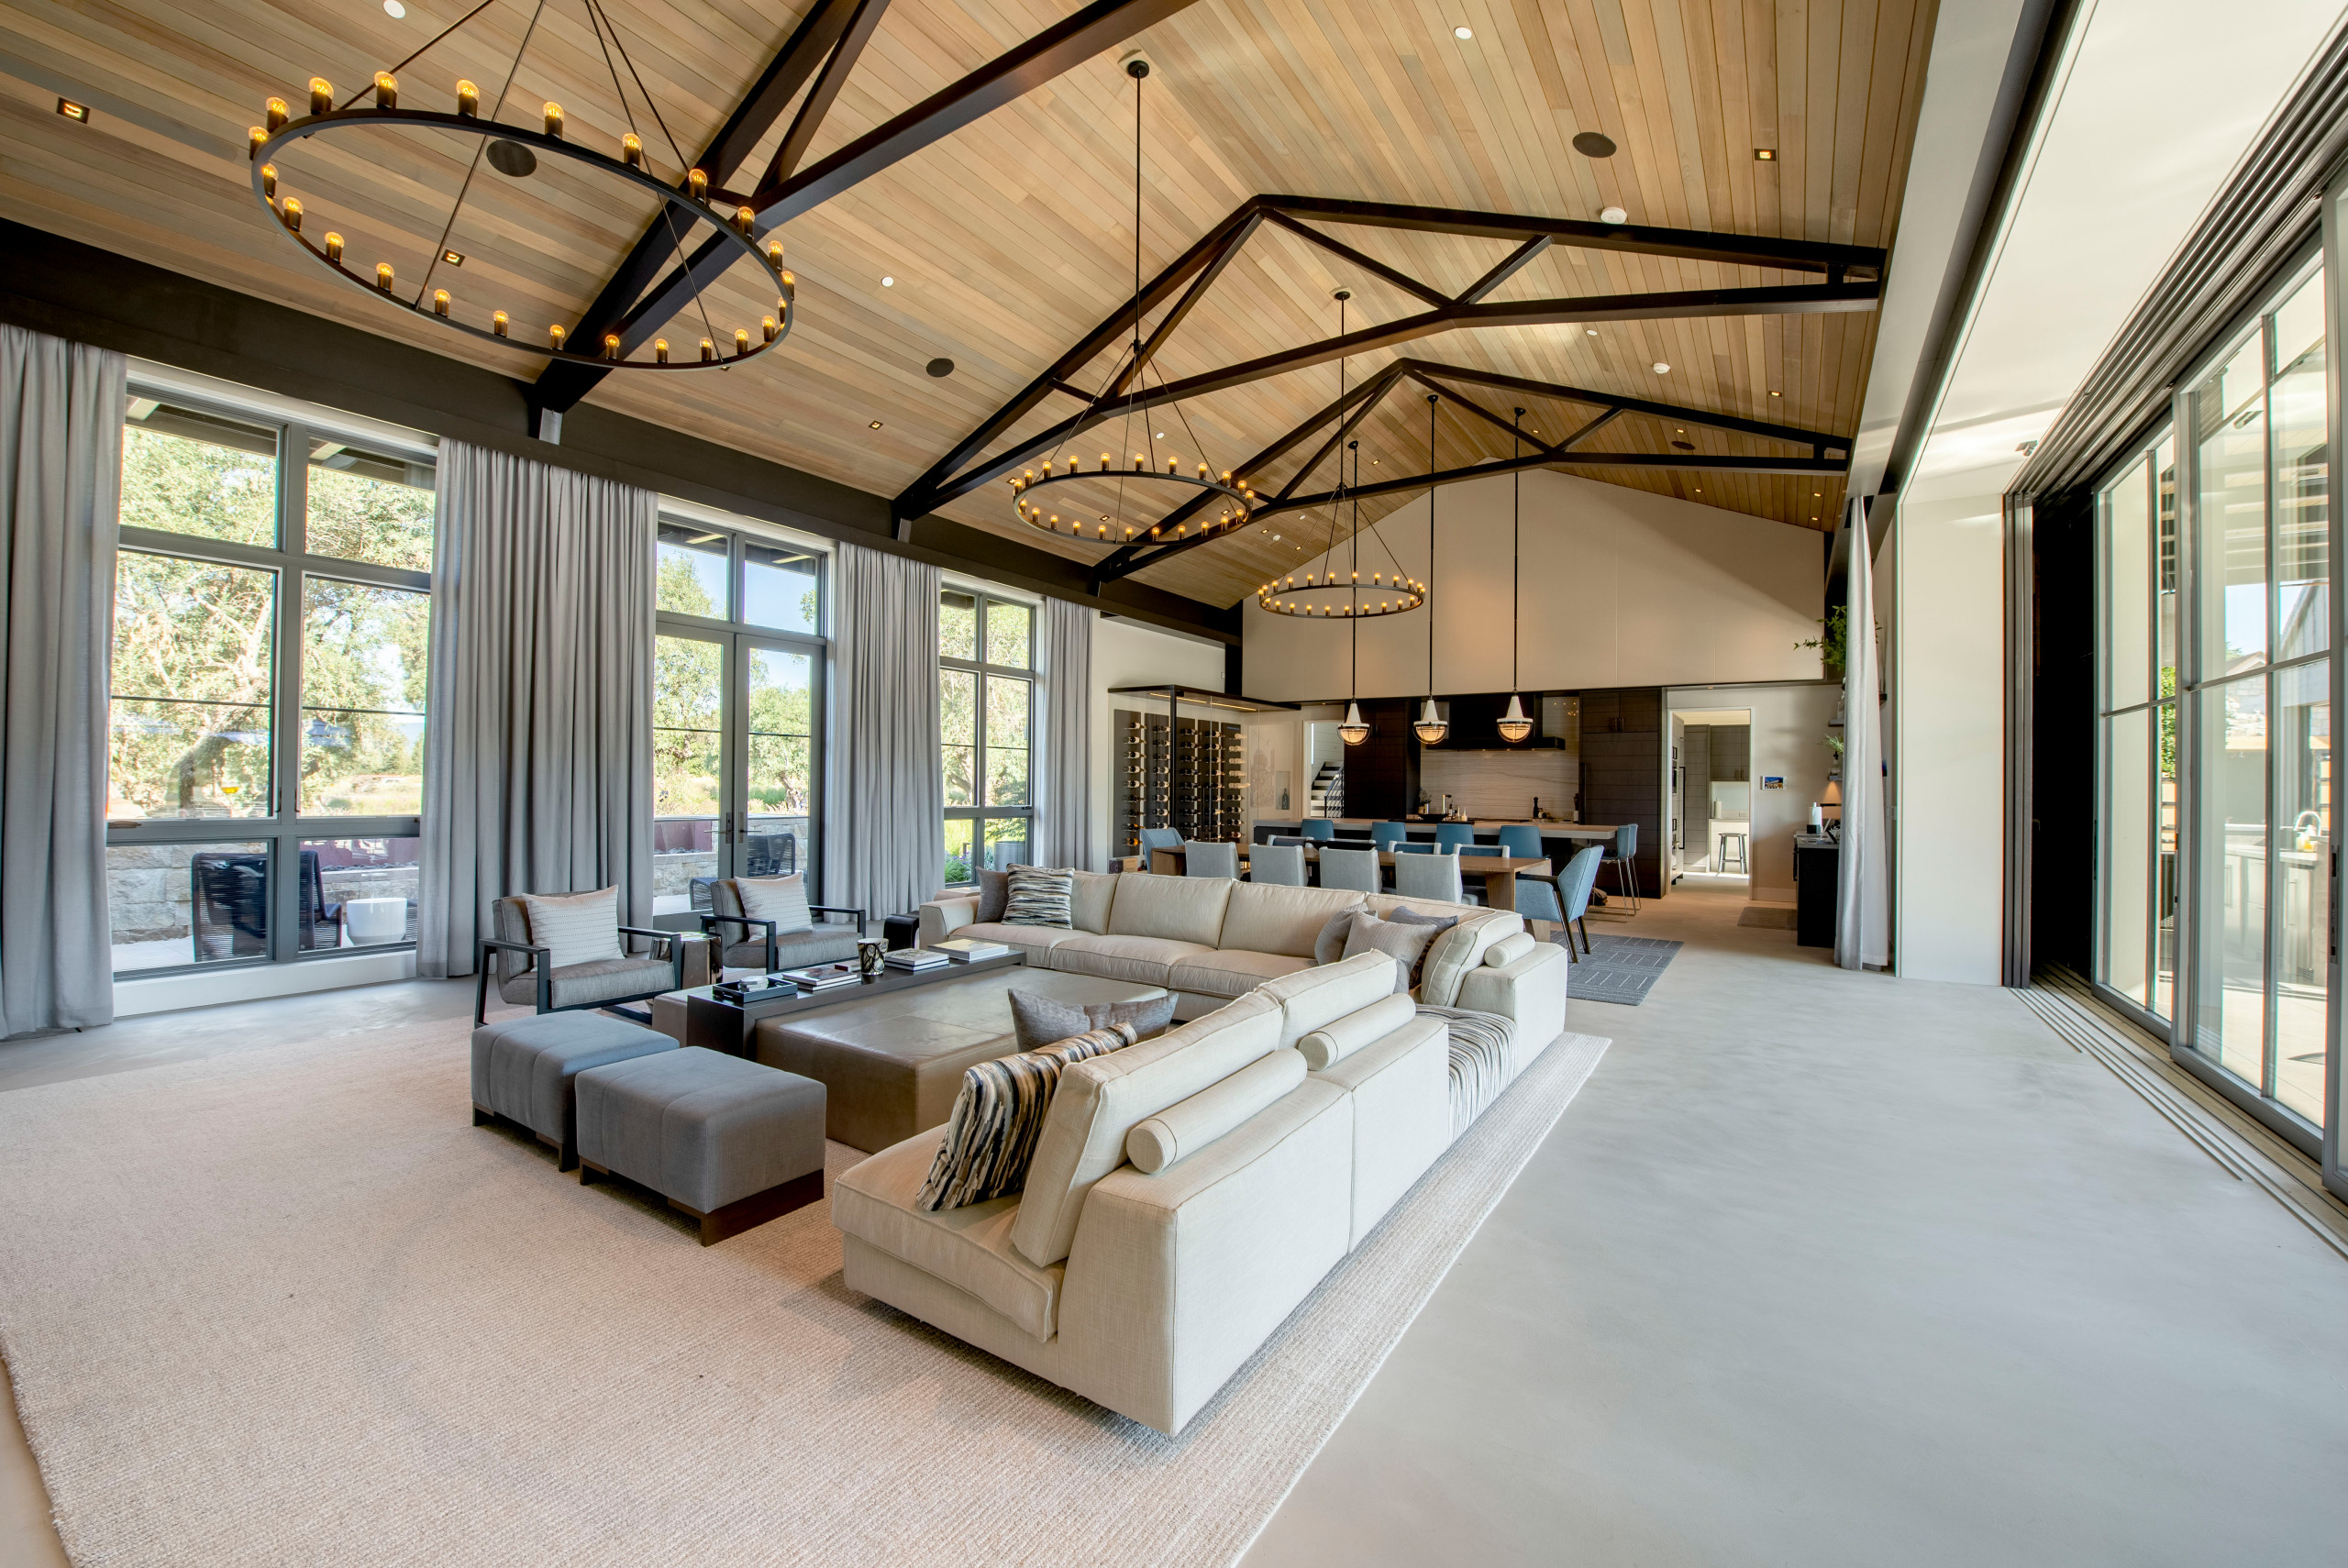 75 Vaulted Ceiling Open Concept Living